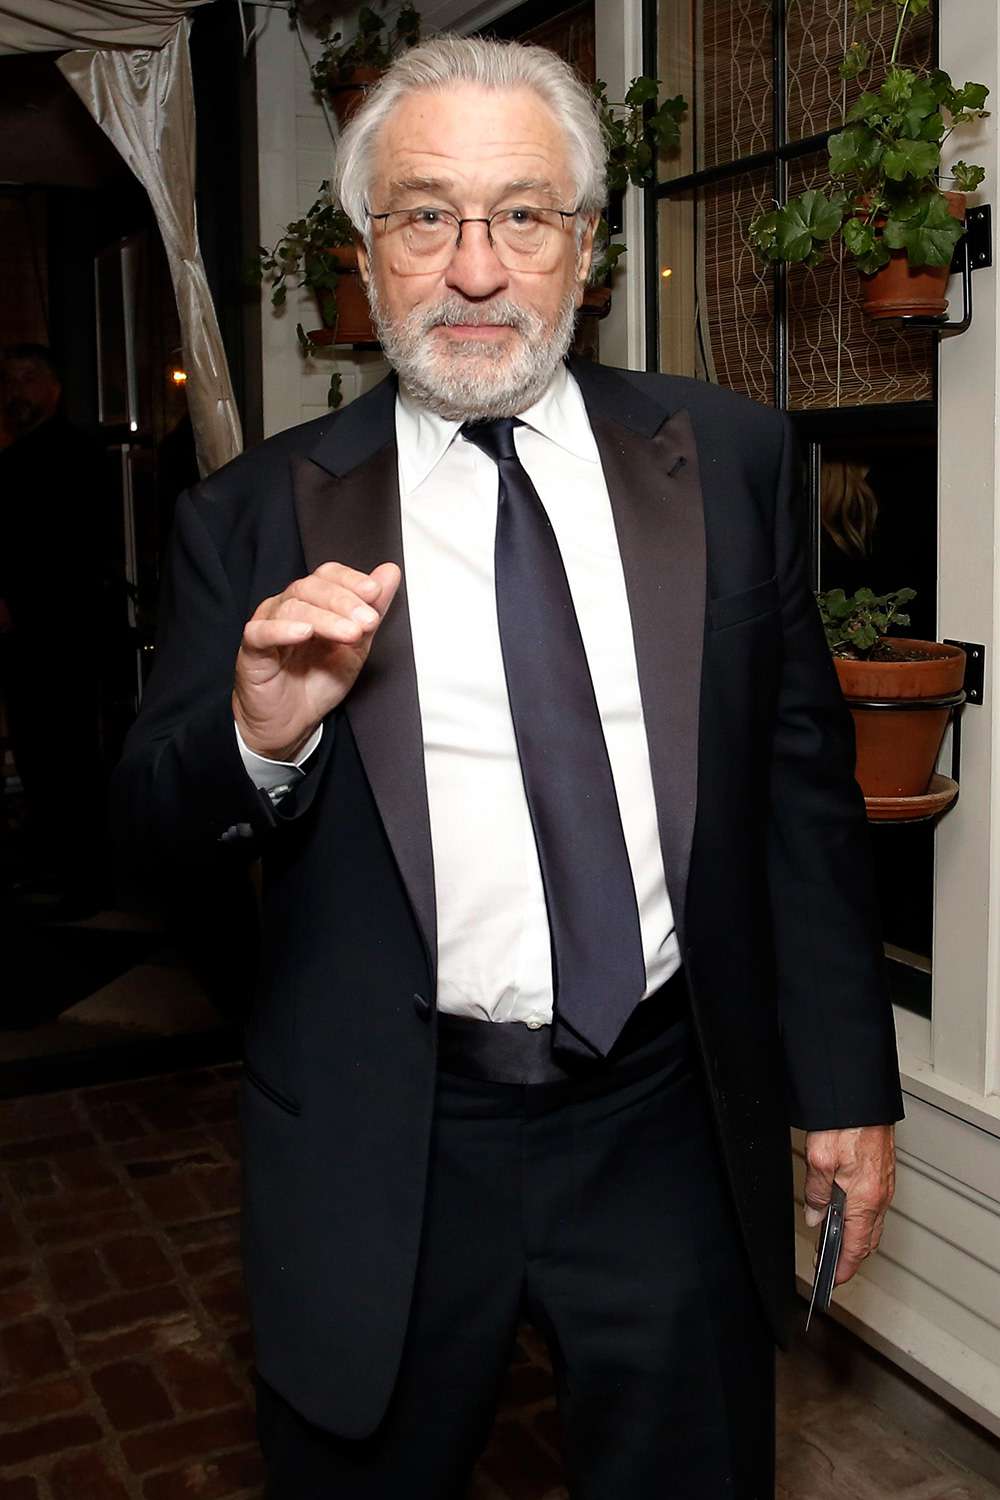 Robert De Niro attends the 2020 Netflix Oscar After Party at San Vicente Bugalows on February 09, 2020 in West Hollywood, California